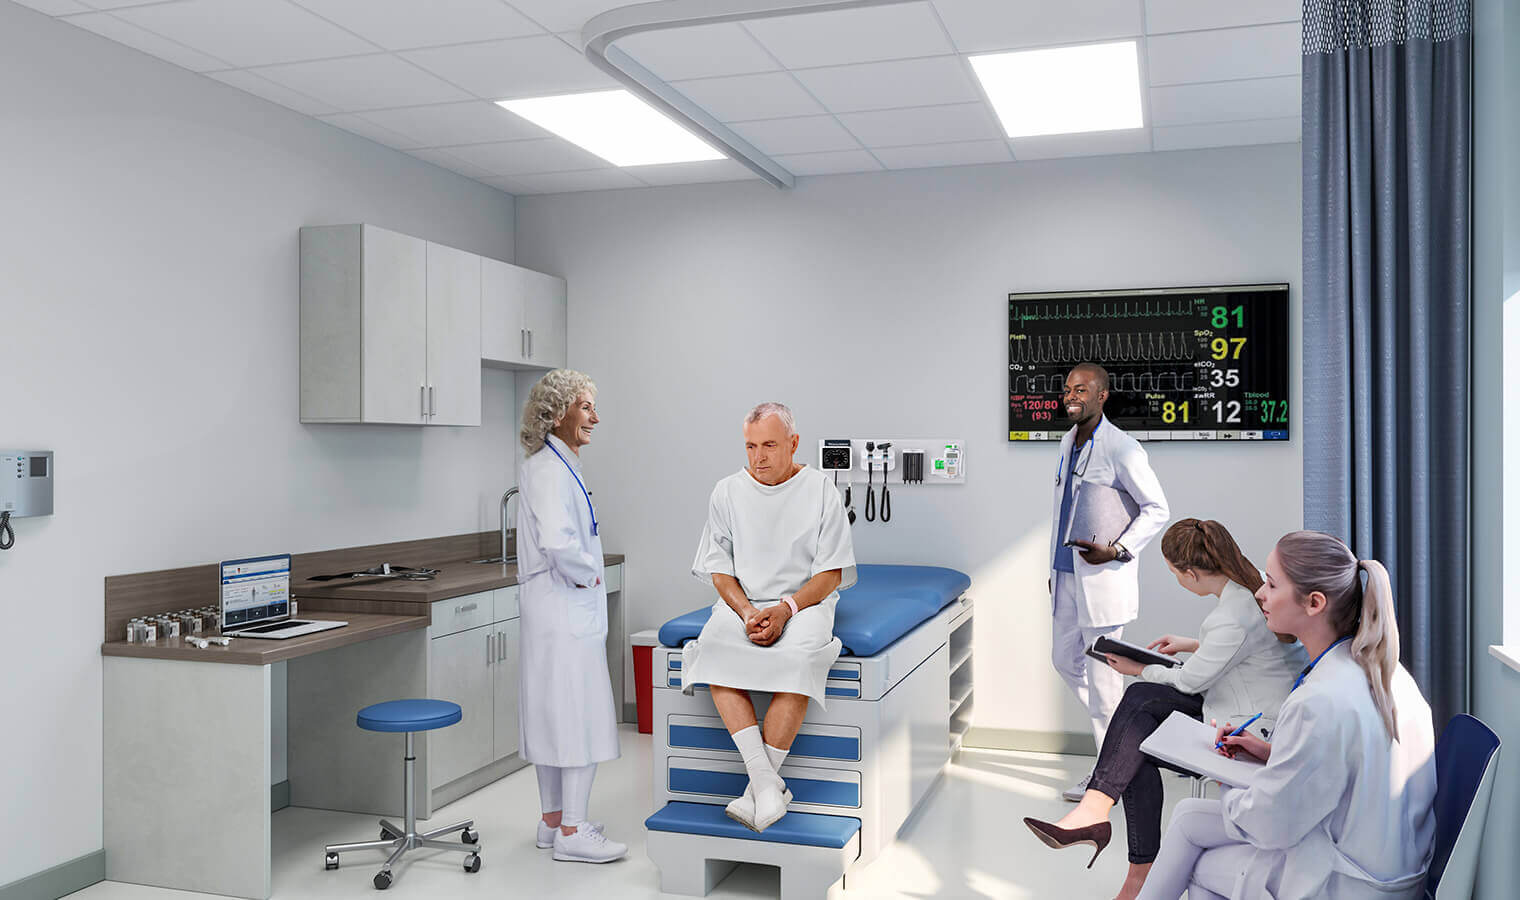 clinical exam rooms